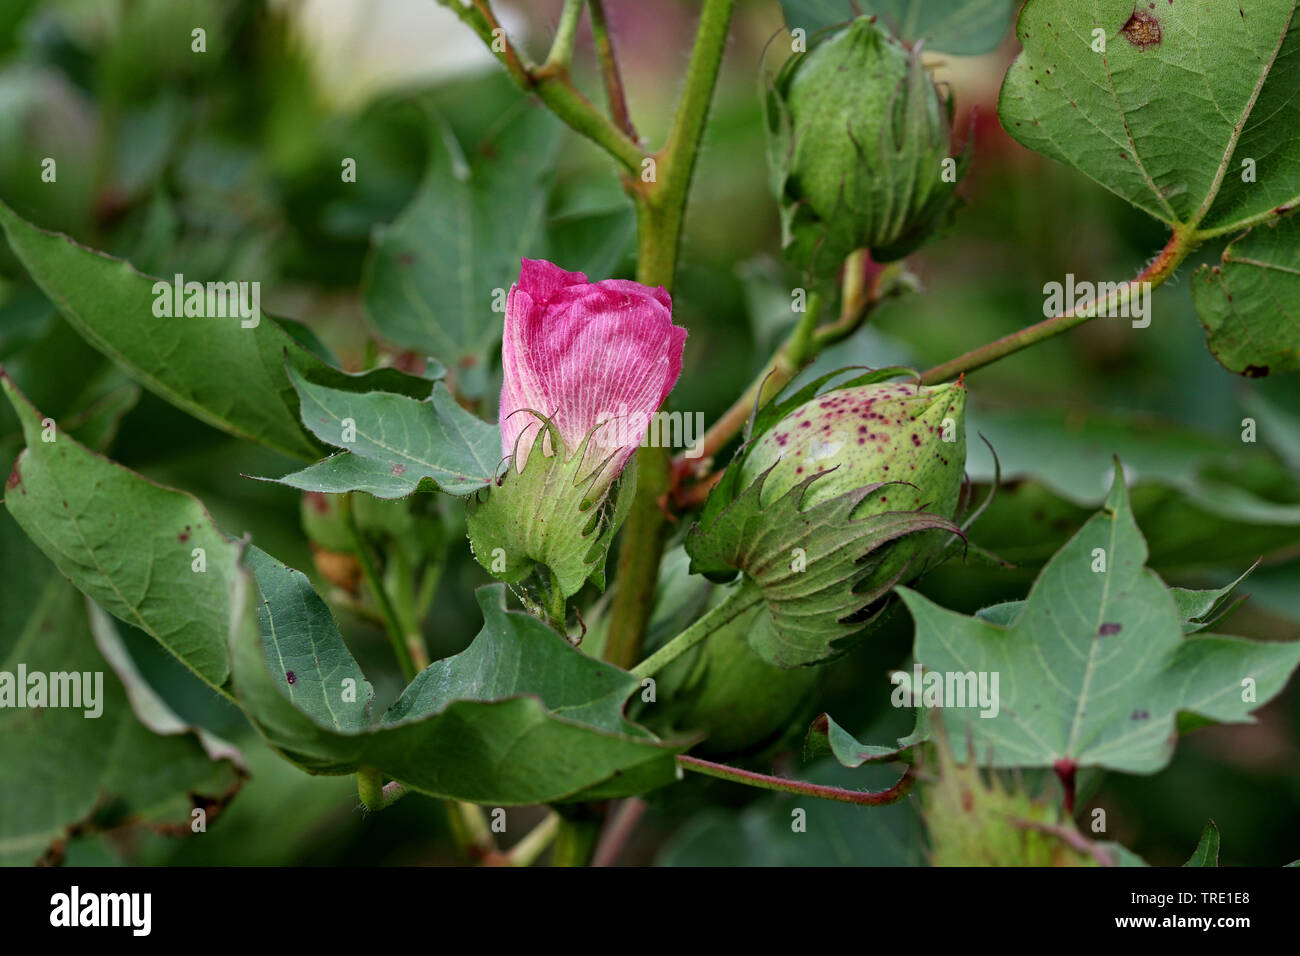 cotton (Gossypium spec.), with withered flower and fruit, Spain, Andalusia Stock Photo